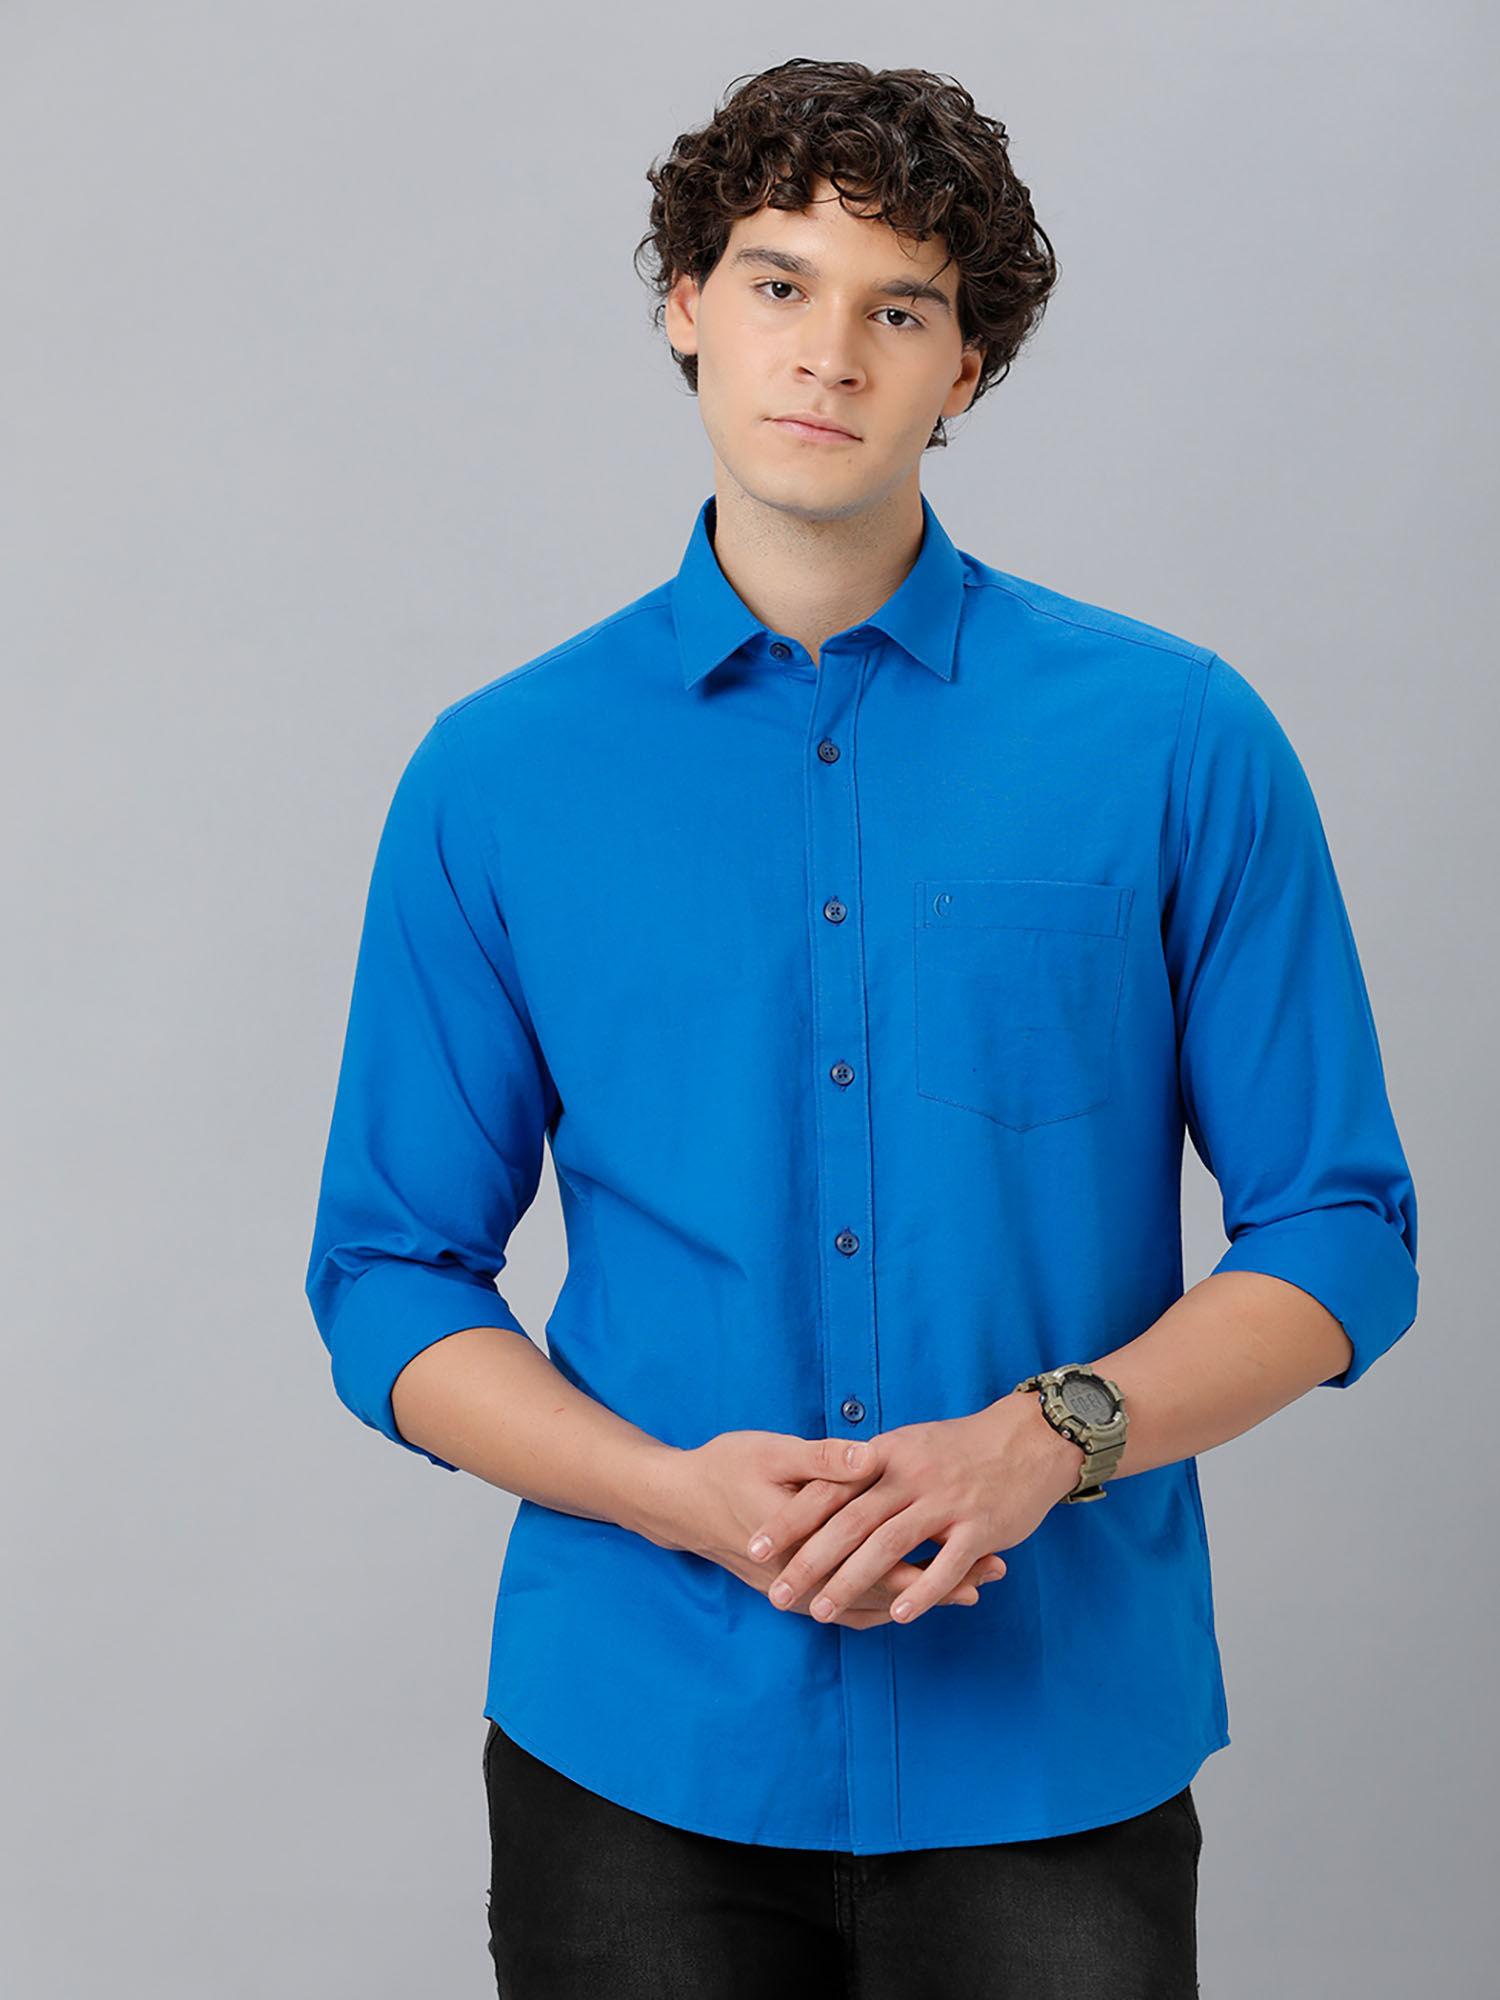 men's cotton linen blue solid slim fit full sleeve casual shirt